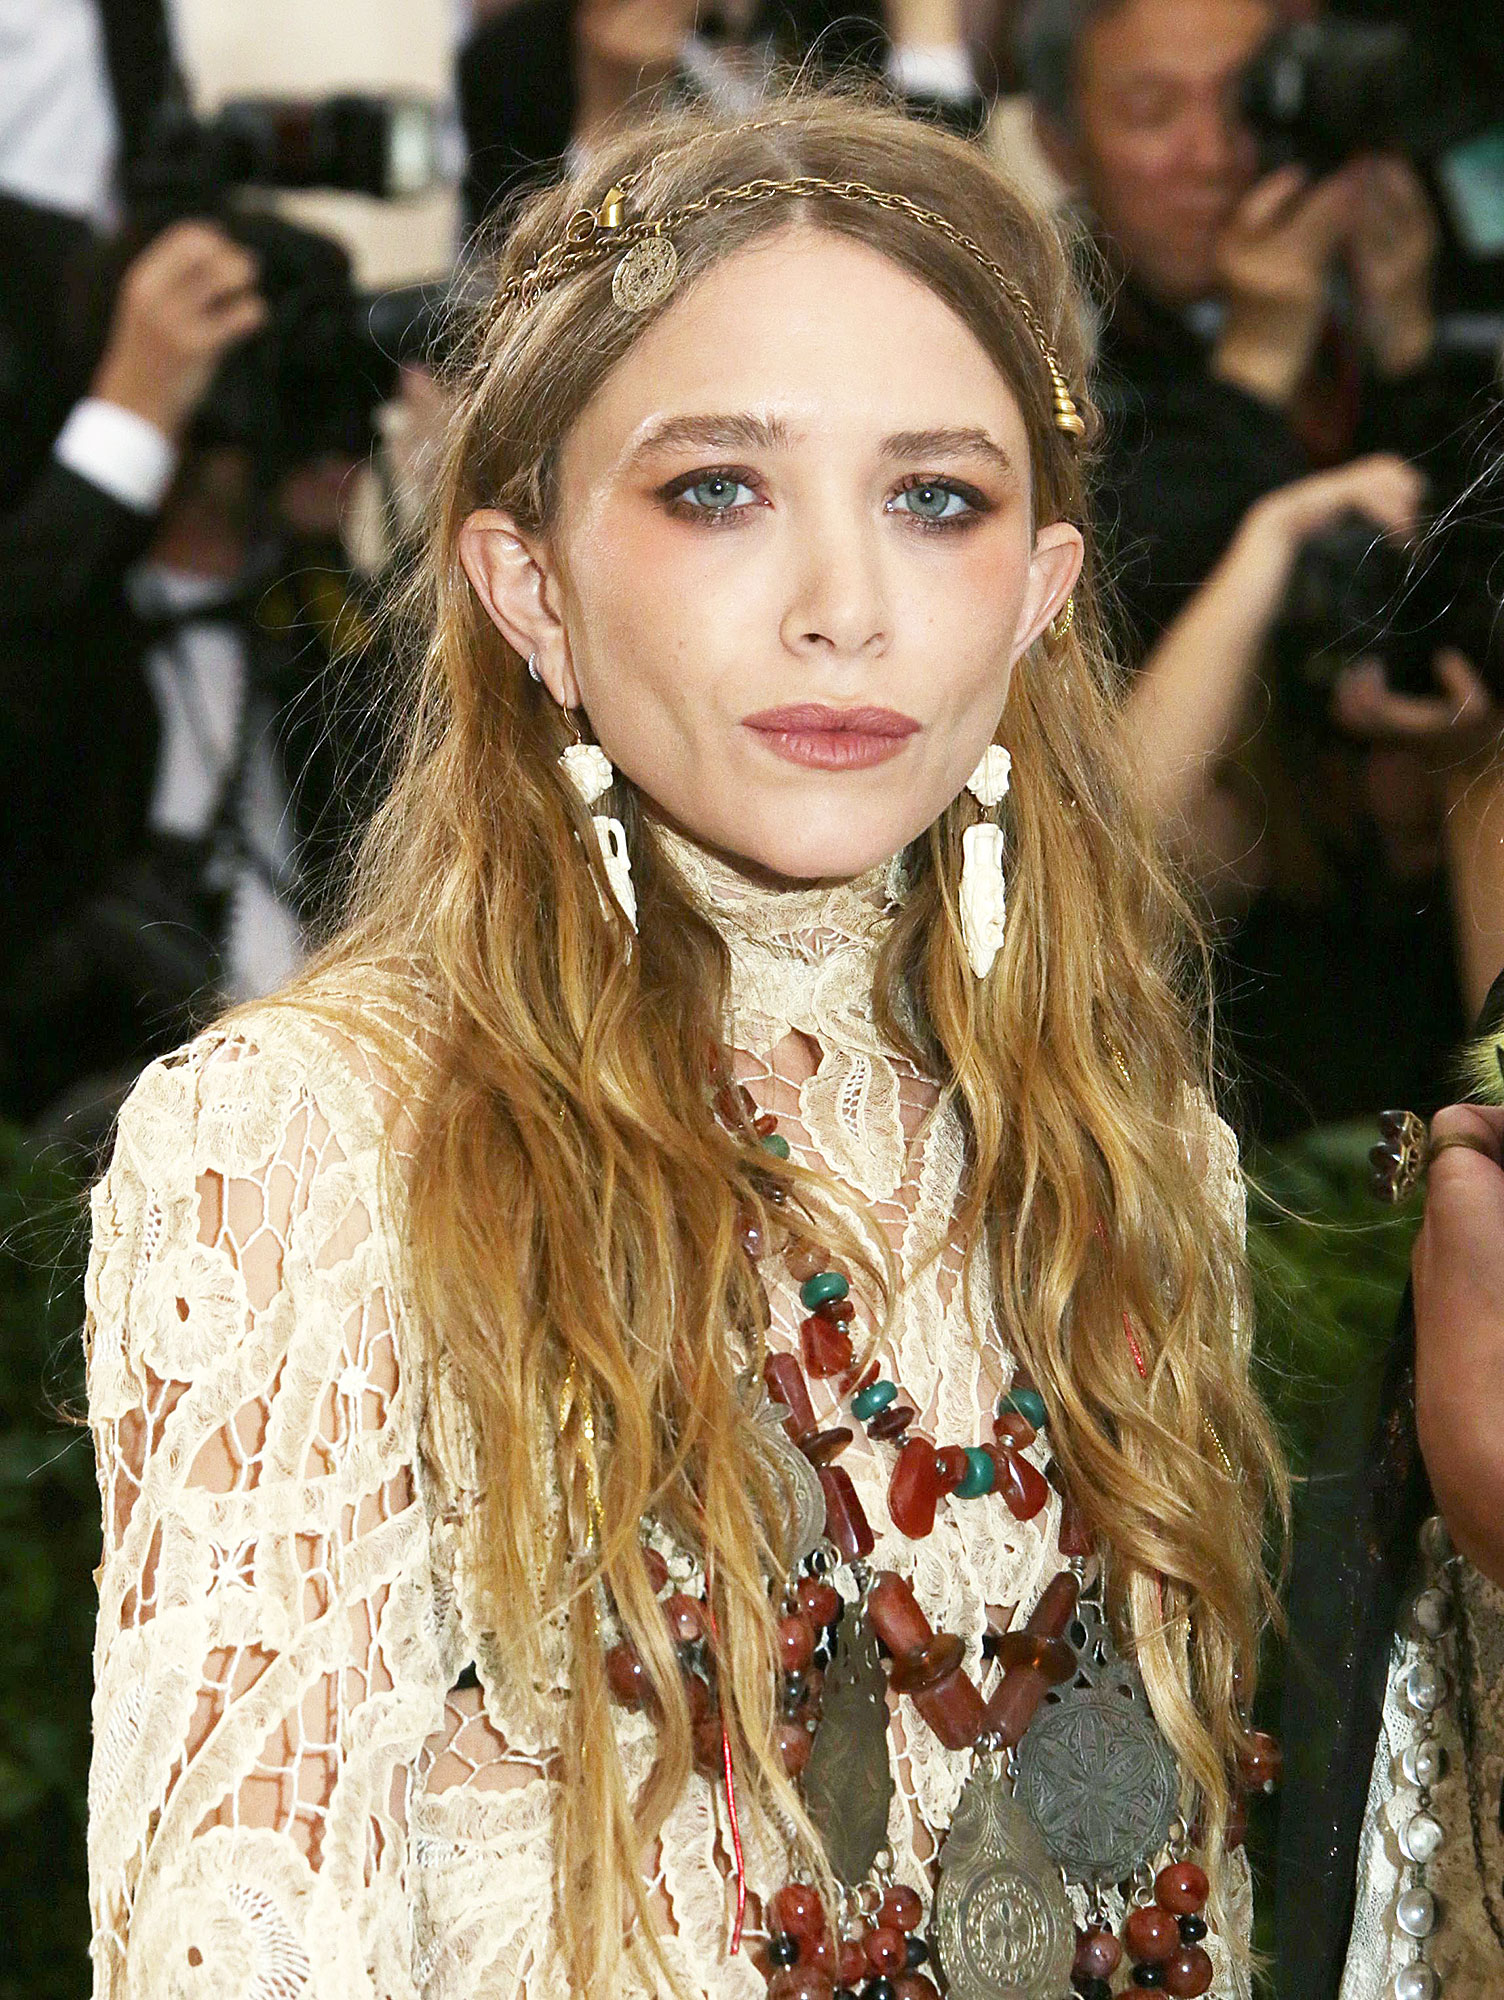 Mary-Kate Olsen at The Costume Institute Benefit celebrating the opening of Rei Kawakubo Comme des Garcons in 2017 Mary-Kate Olsen Sparks Dating Rumors With Brightwire CEO John Cooper 5 Things to Know